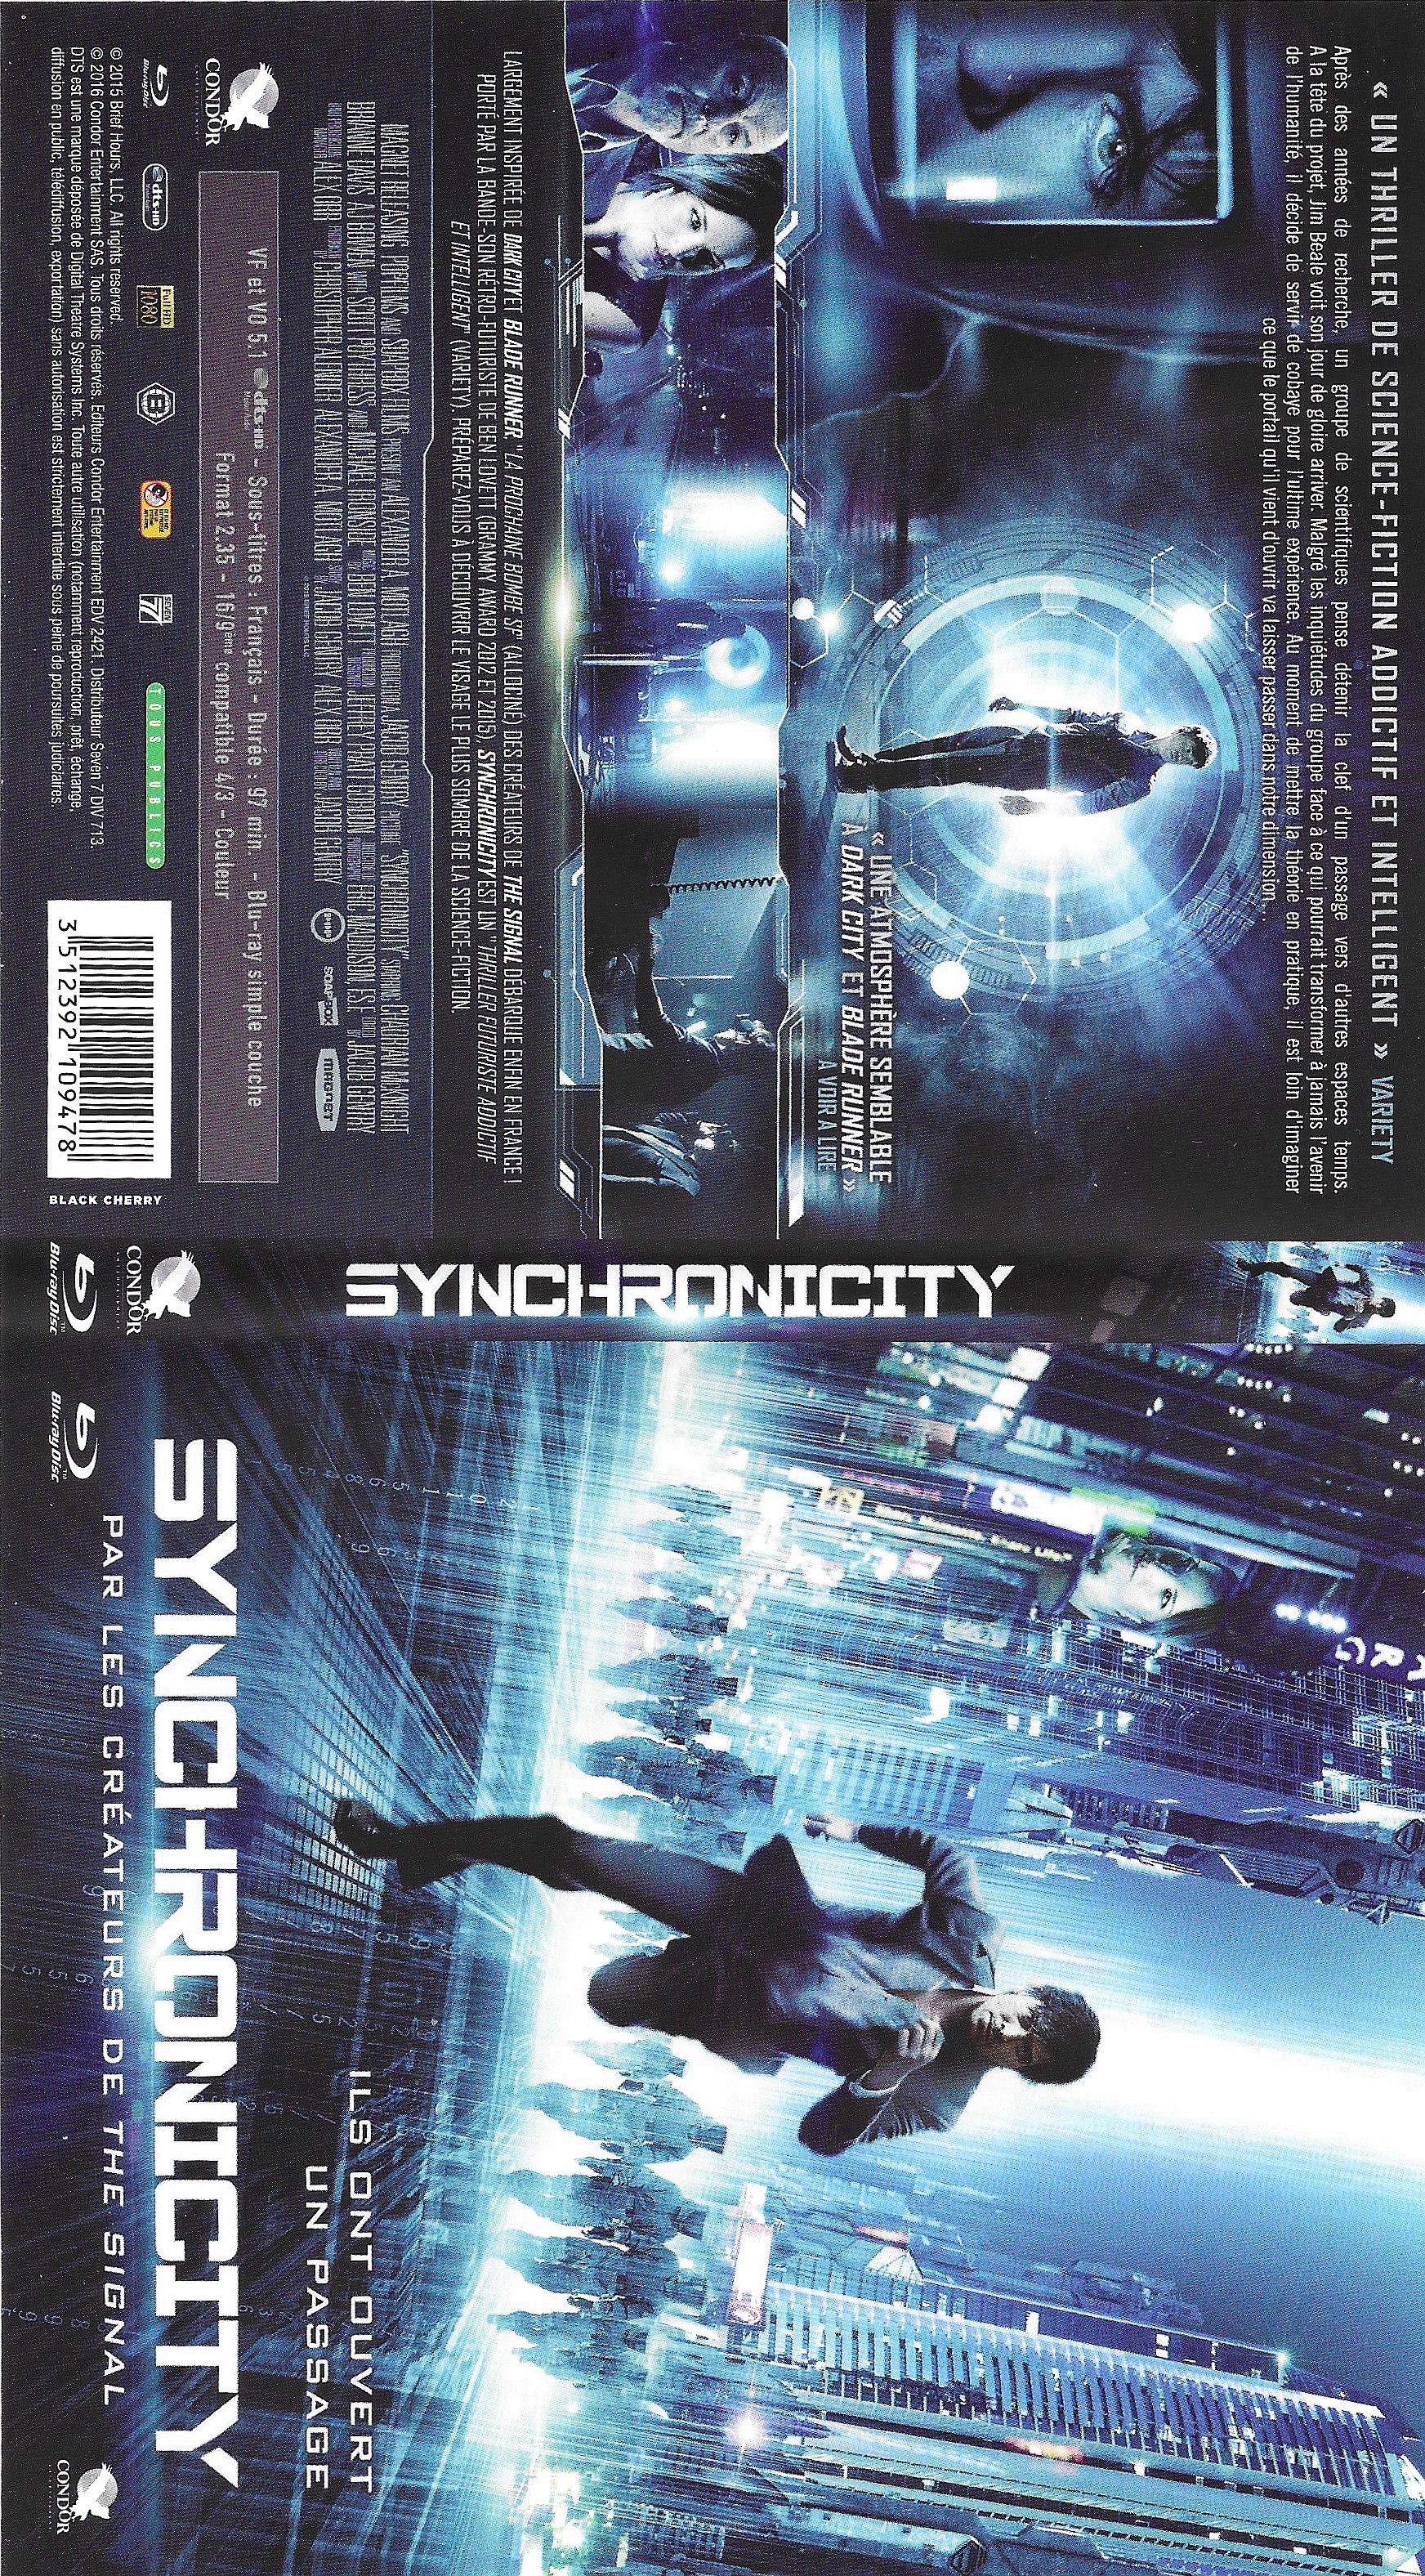 Jaquette DVD Synchronicity (BLU-RAY)